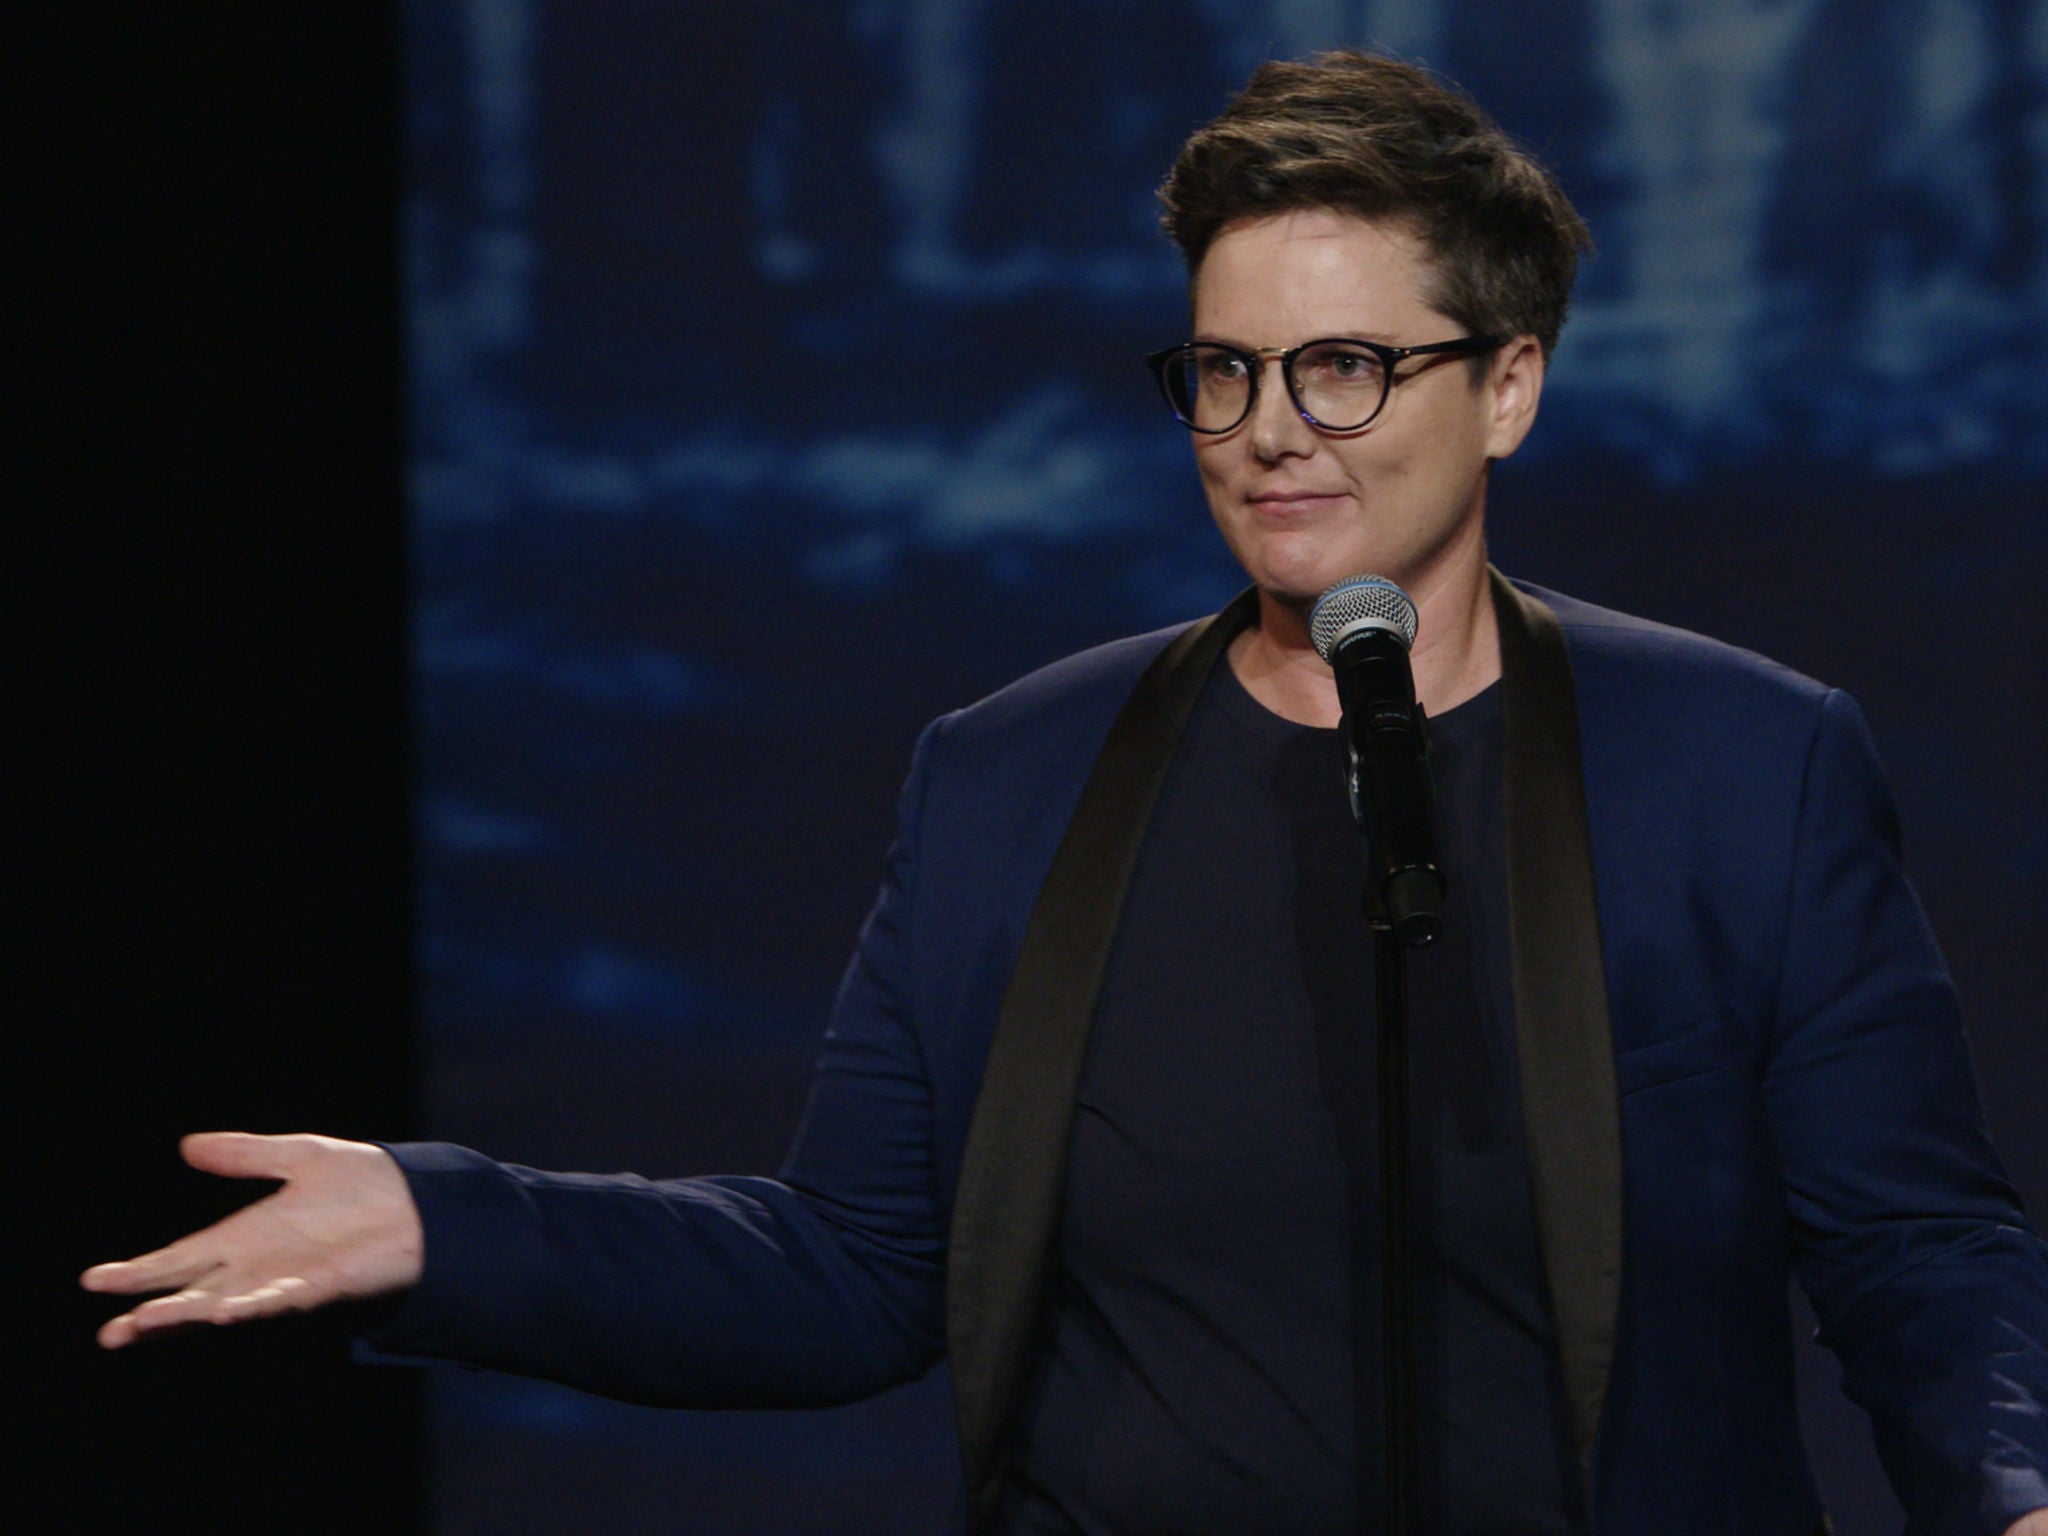 ‘Nanette’ is among Netflix’s most-positively received specials ever, a spokeswoman said